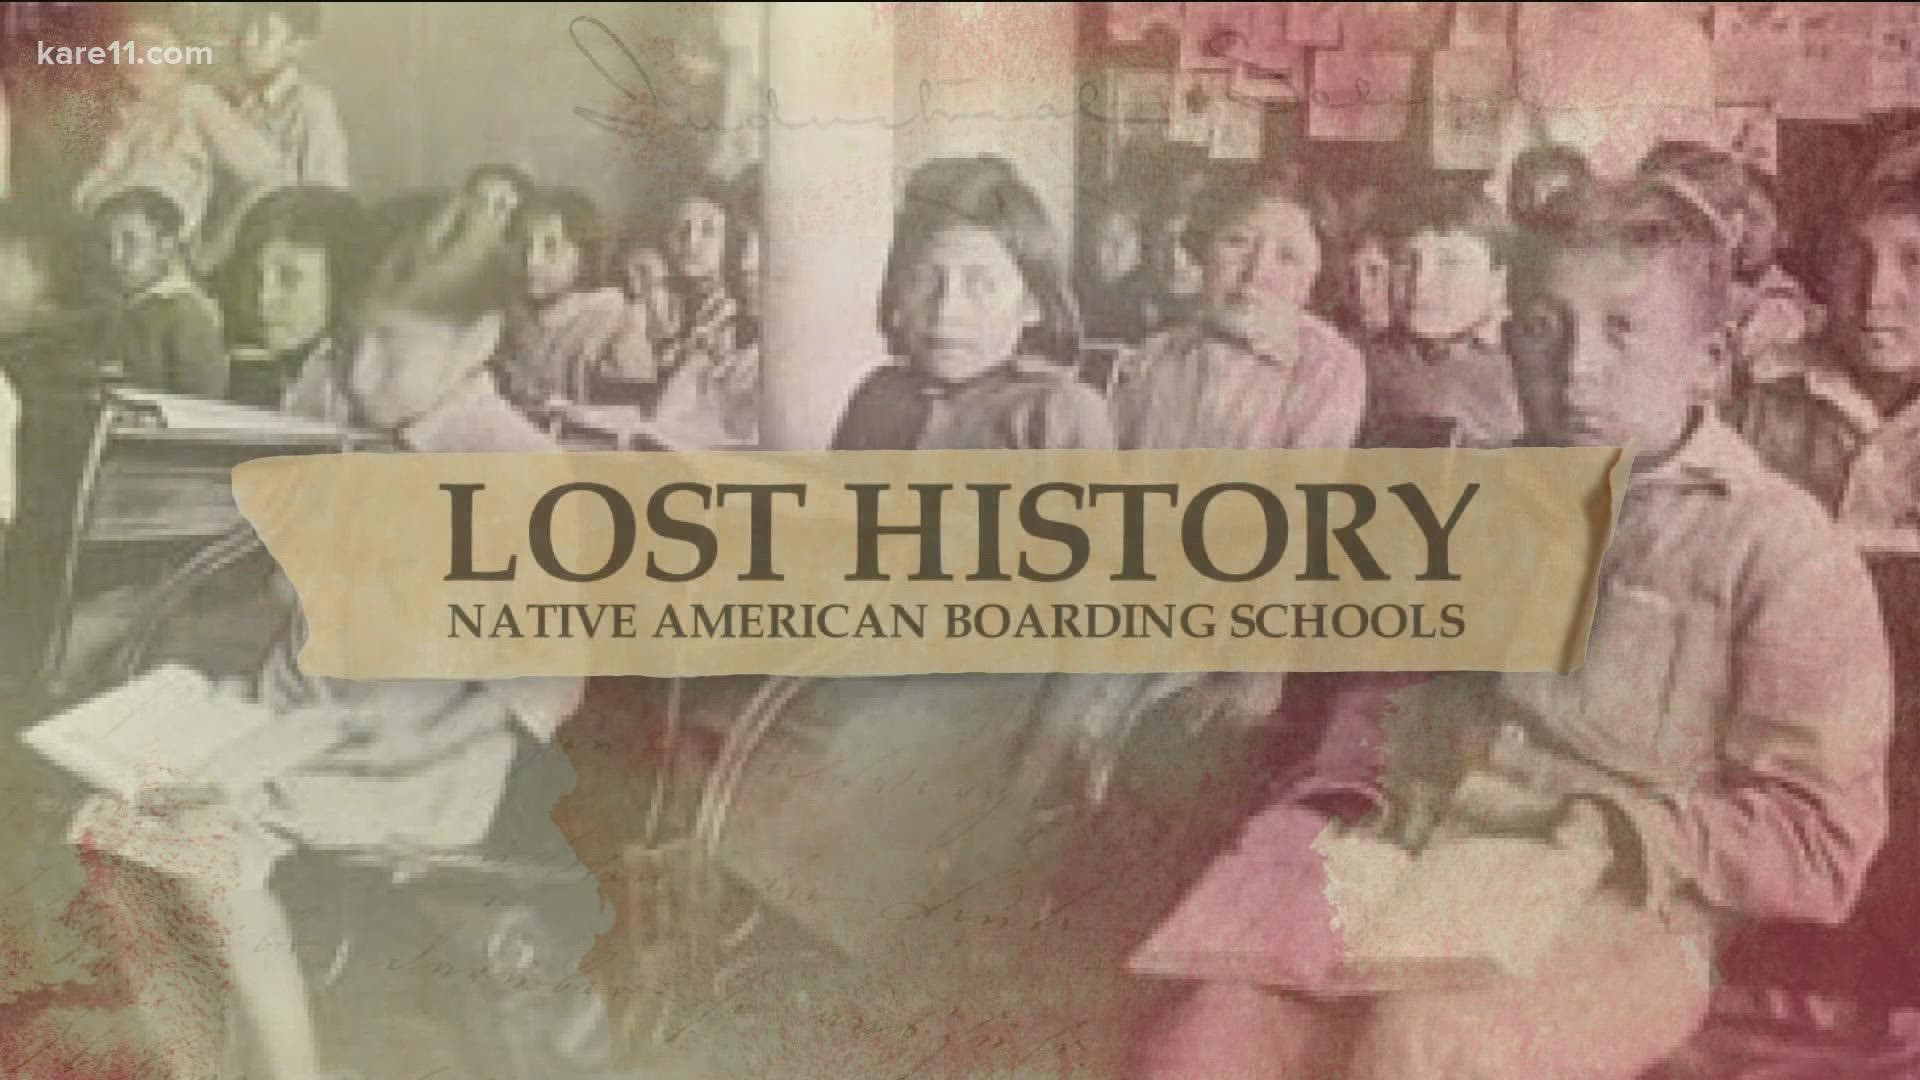 For decades, many American Indian children were forced to attend government-funded boarding schools designed to sever Native cultures, languages and traditions.